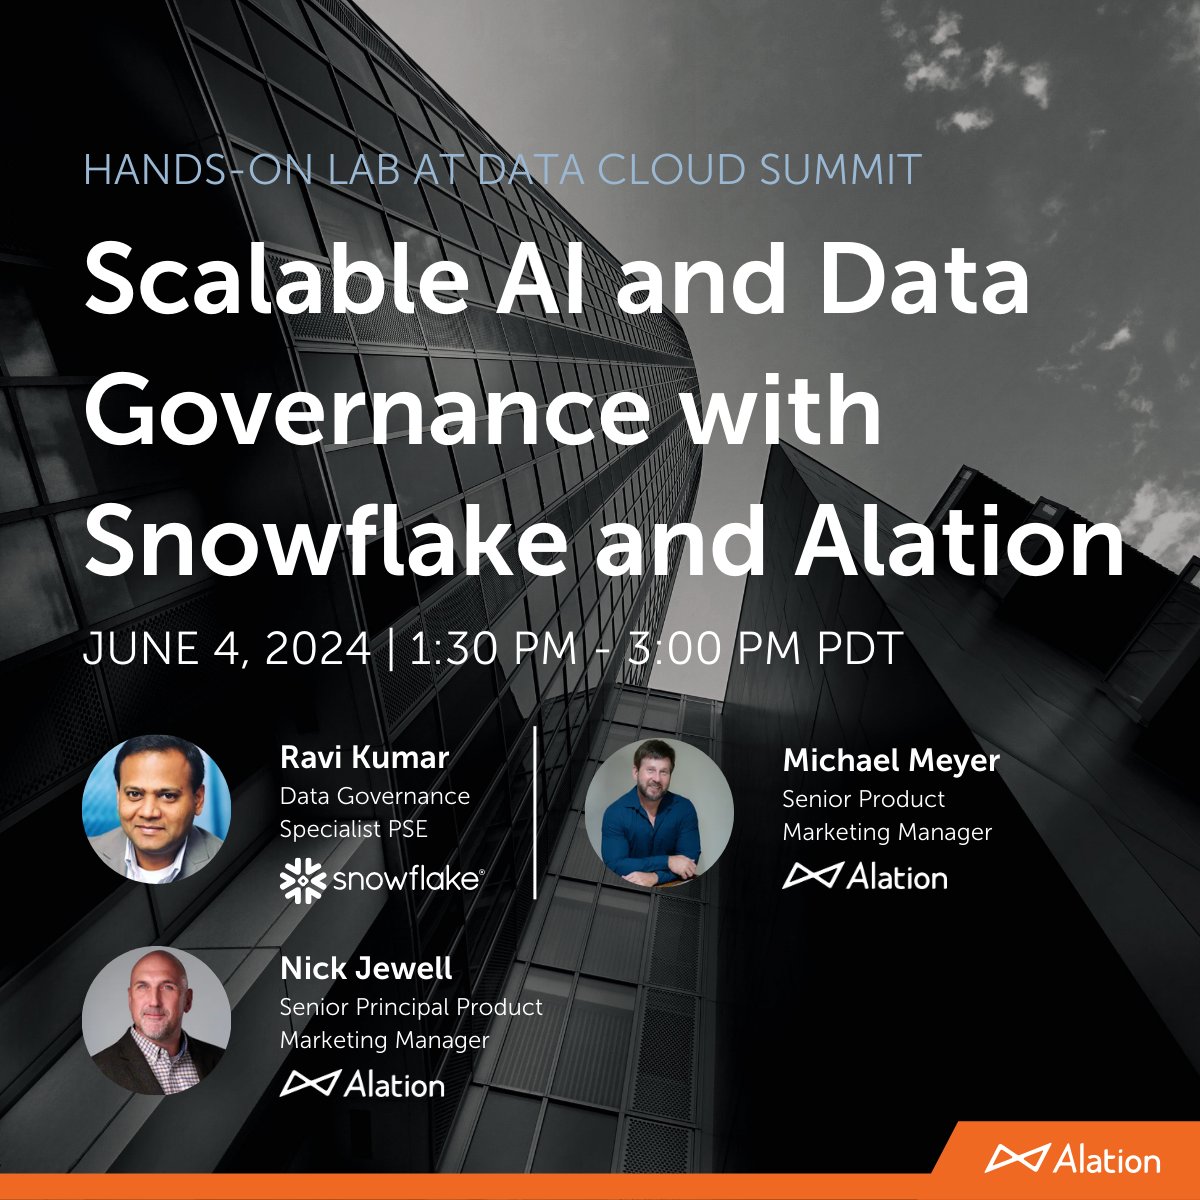 Join our hands-on lab round ✌️ at #datacloudsummit. On 6/4, learn how Alation users access and work with data in @SnowflakeDB. ❄️ You'll also see how to apply governance to data within Snowflake using Snowflake Horizon capabilities alation.com/events/snowfla… @dataguyatheart